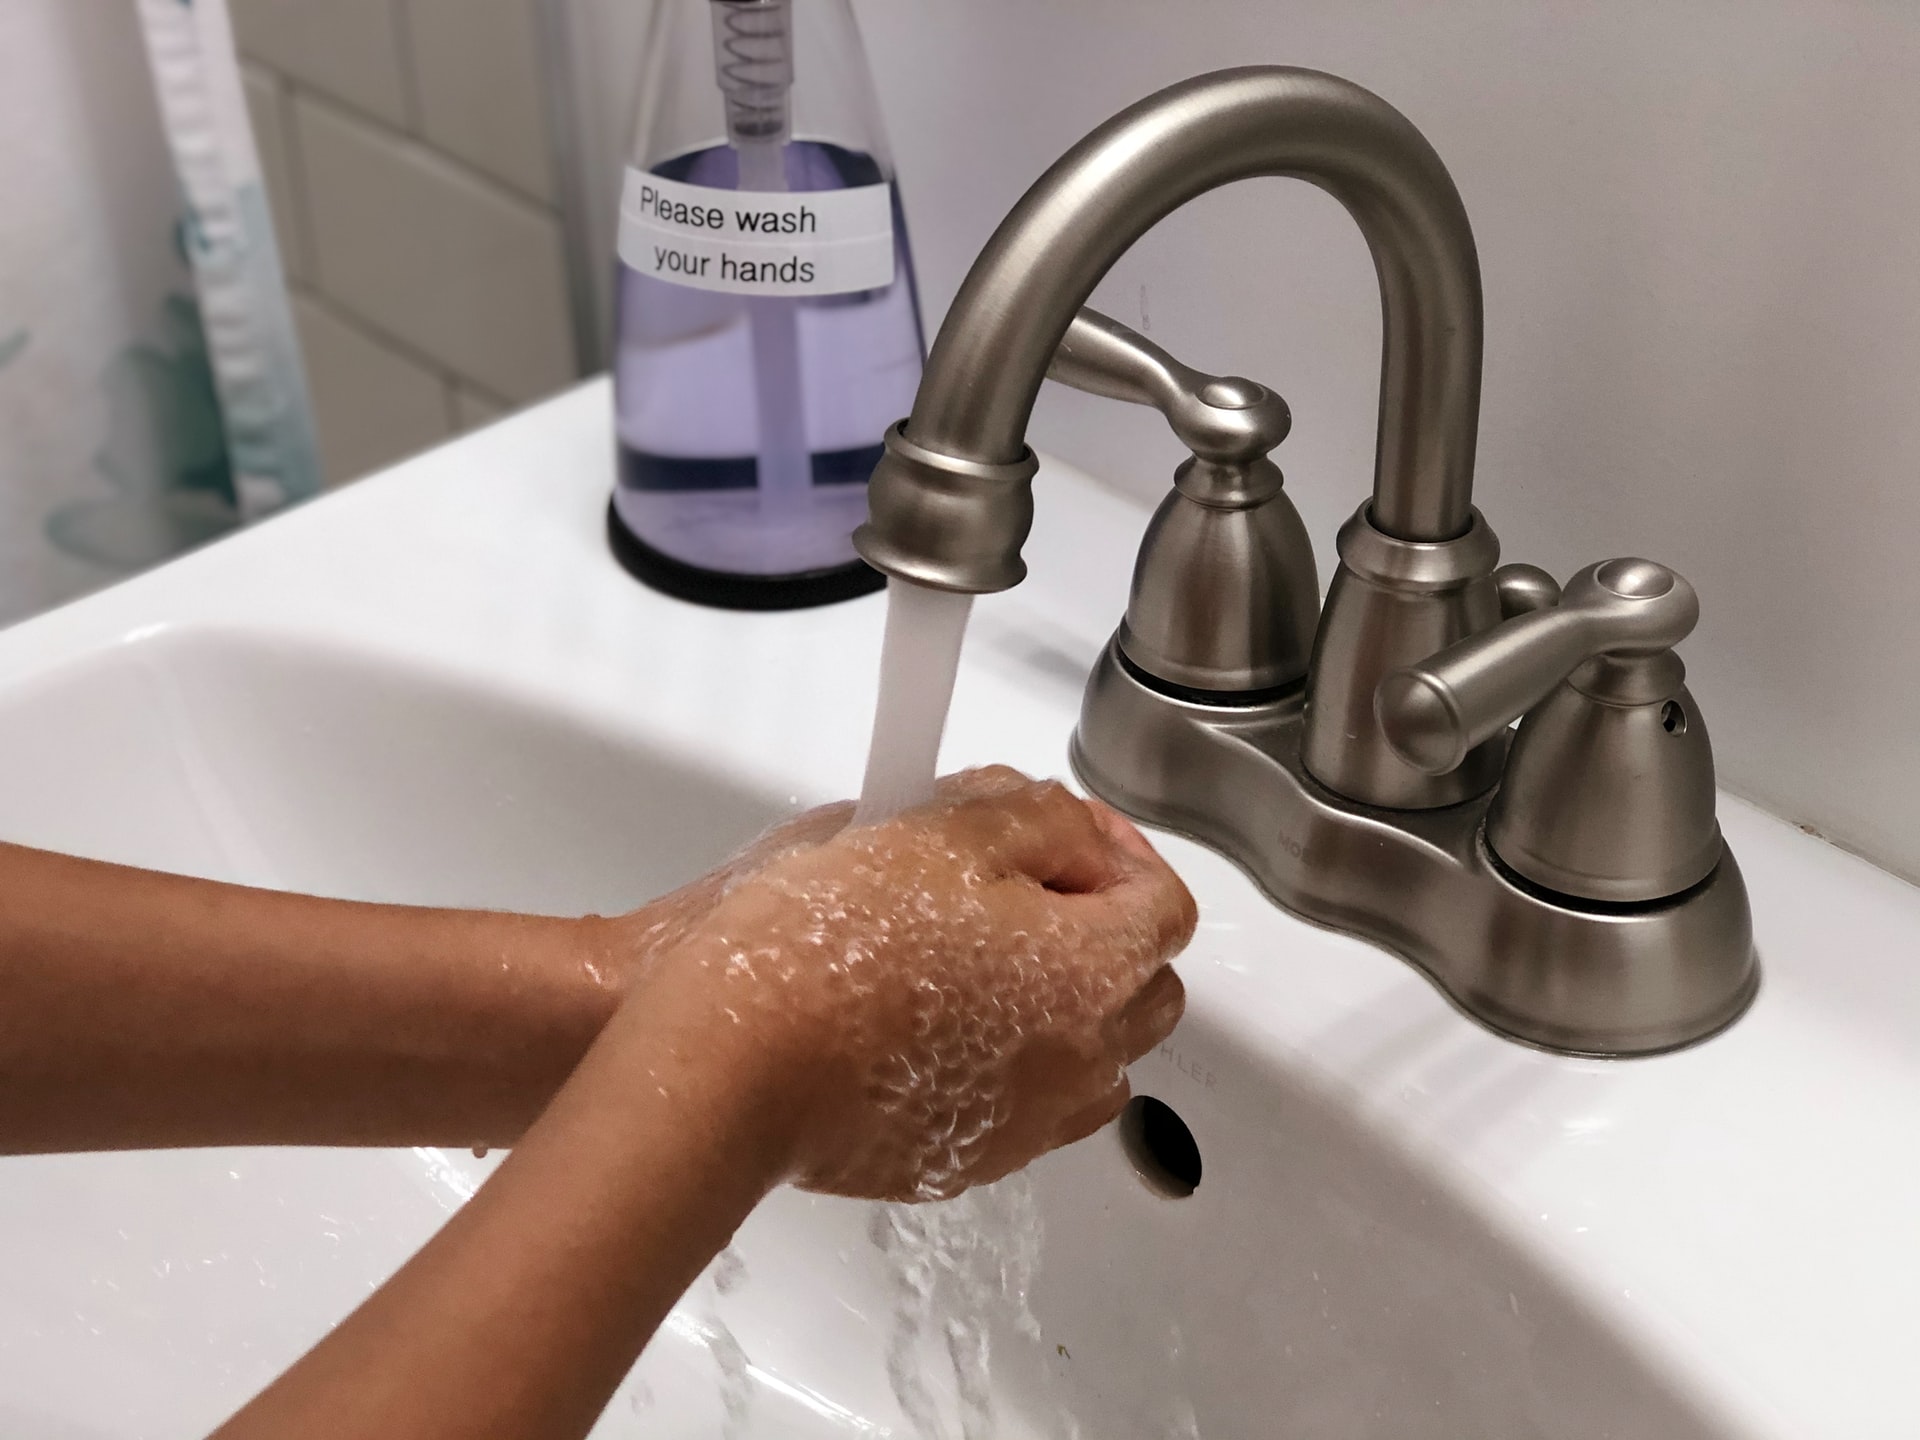 Over 40% of schools lacked basic handwashing facilities in 2019: WHO